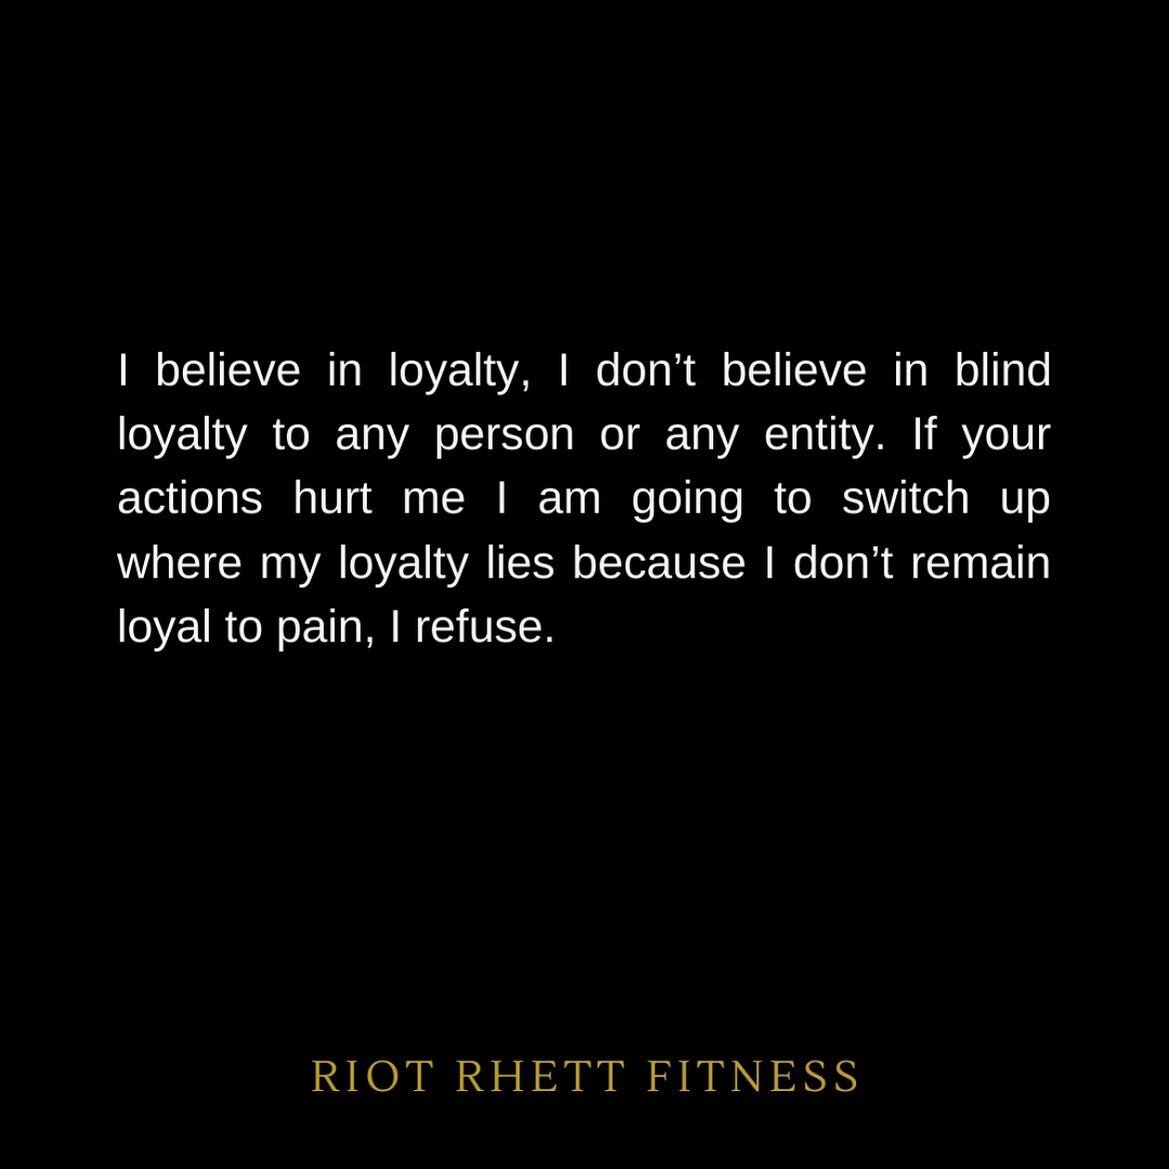 I believe in loyalty, I don't believe in blind loyalty to any person or any entity. If your actions hurt me I am going to switch up where my loyalty lies because I don't remain loyal to pain, I refuse.